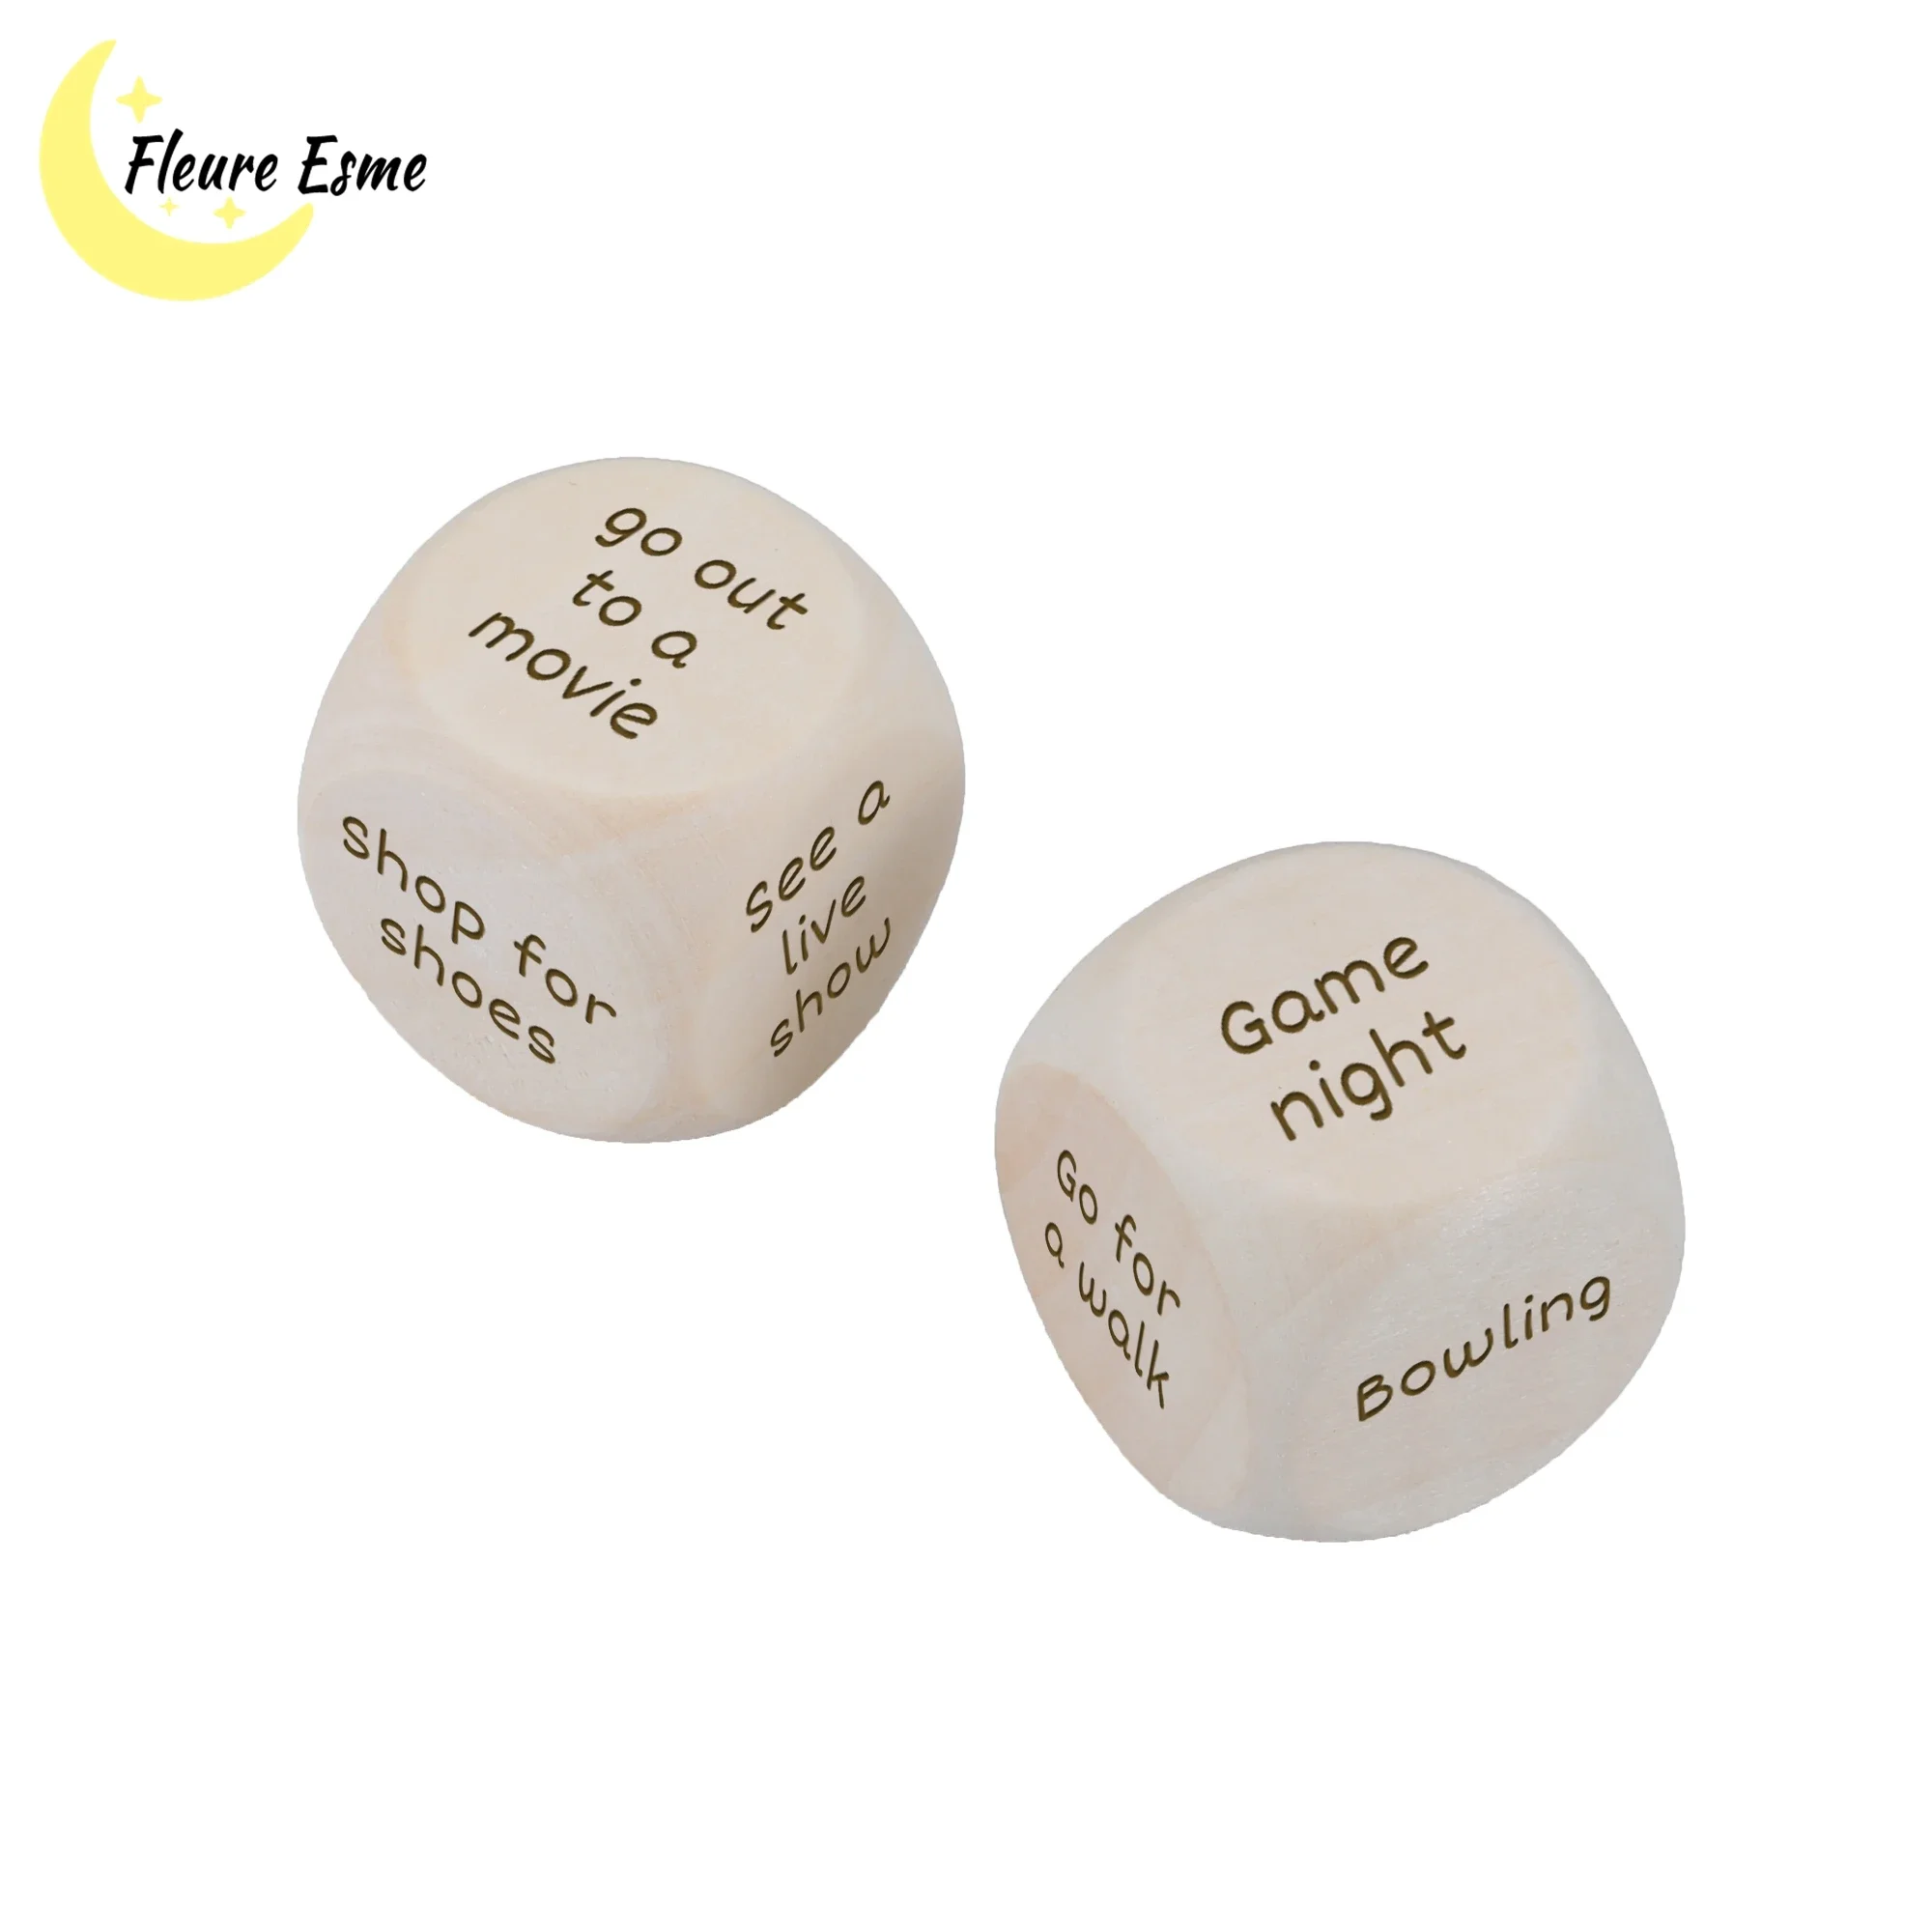 

1 PCS Personalized Dice Used To Decide What To Do Custom Engraved Dice Fun and Game Date Night Decision Game with Friends